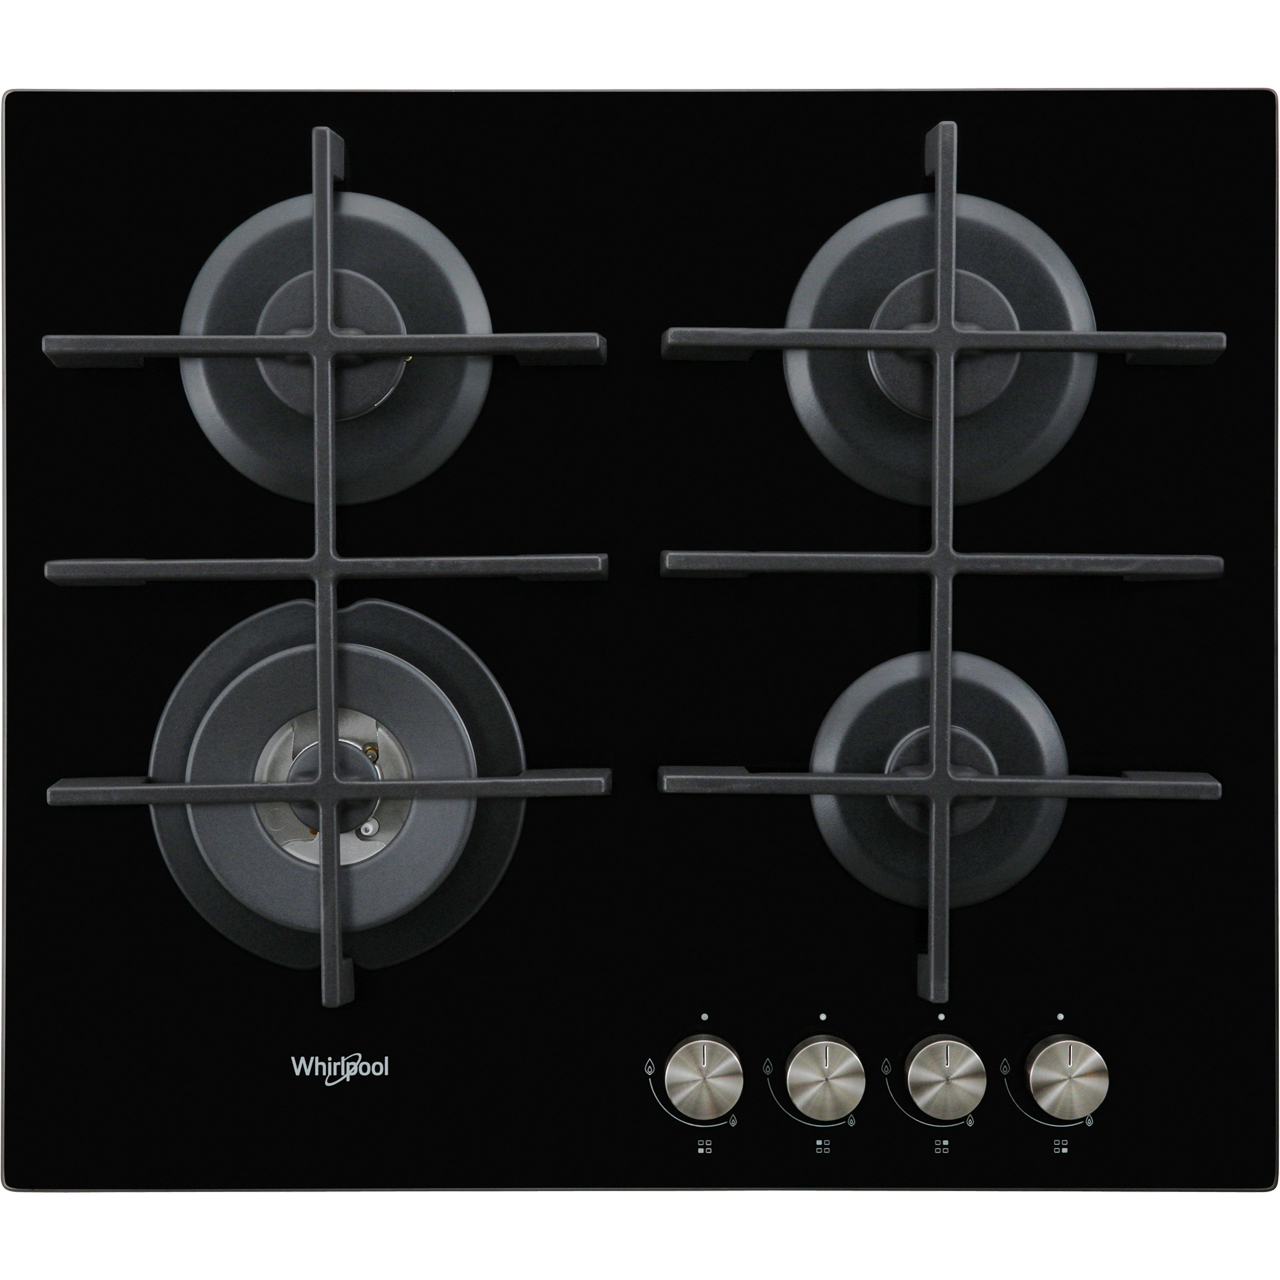 Whirlpool W Collection GOW6423/NB 59cm Gas Hob Review